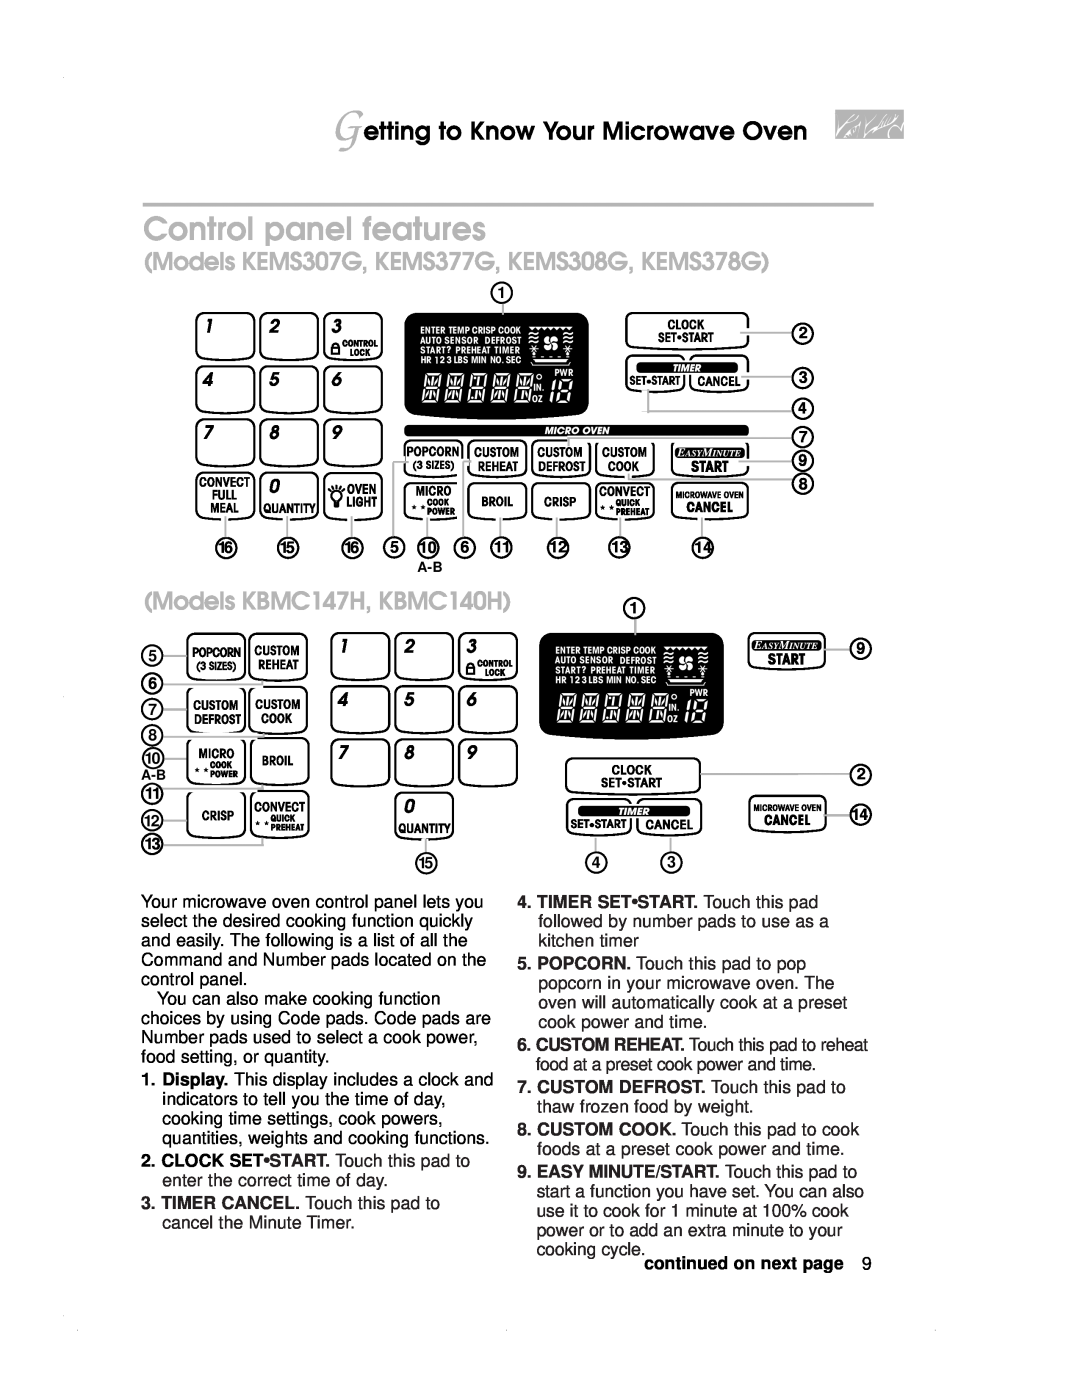 KitchenAid KEMS377G Control panel features, Getting to Know Your Microwave Oven, Models KBMC147H, KBMC140H, 4 5 7 8 